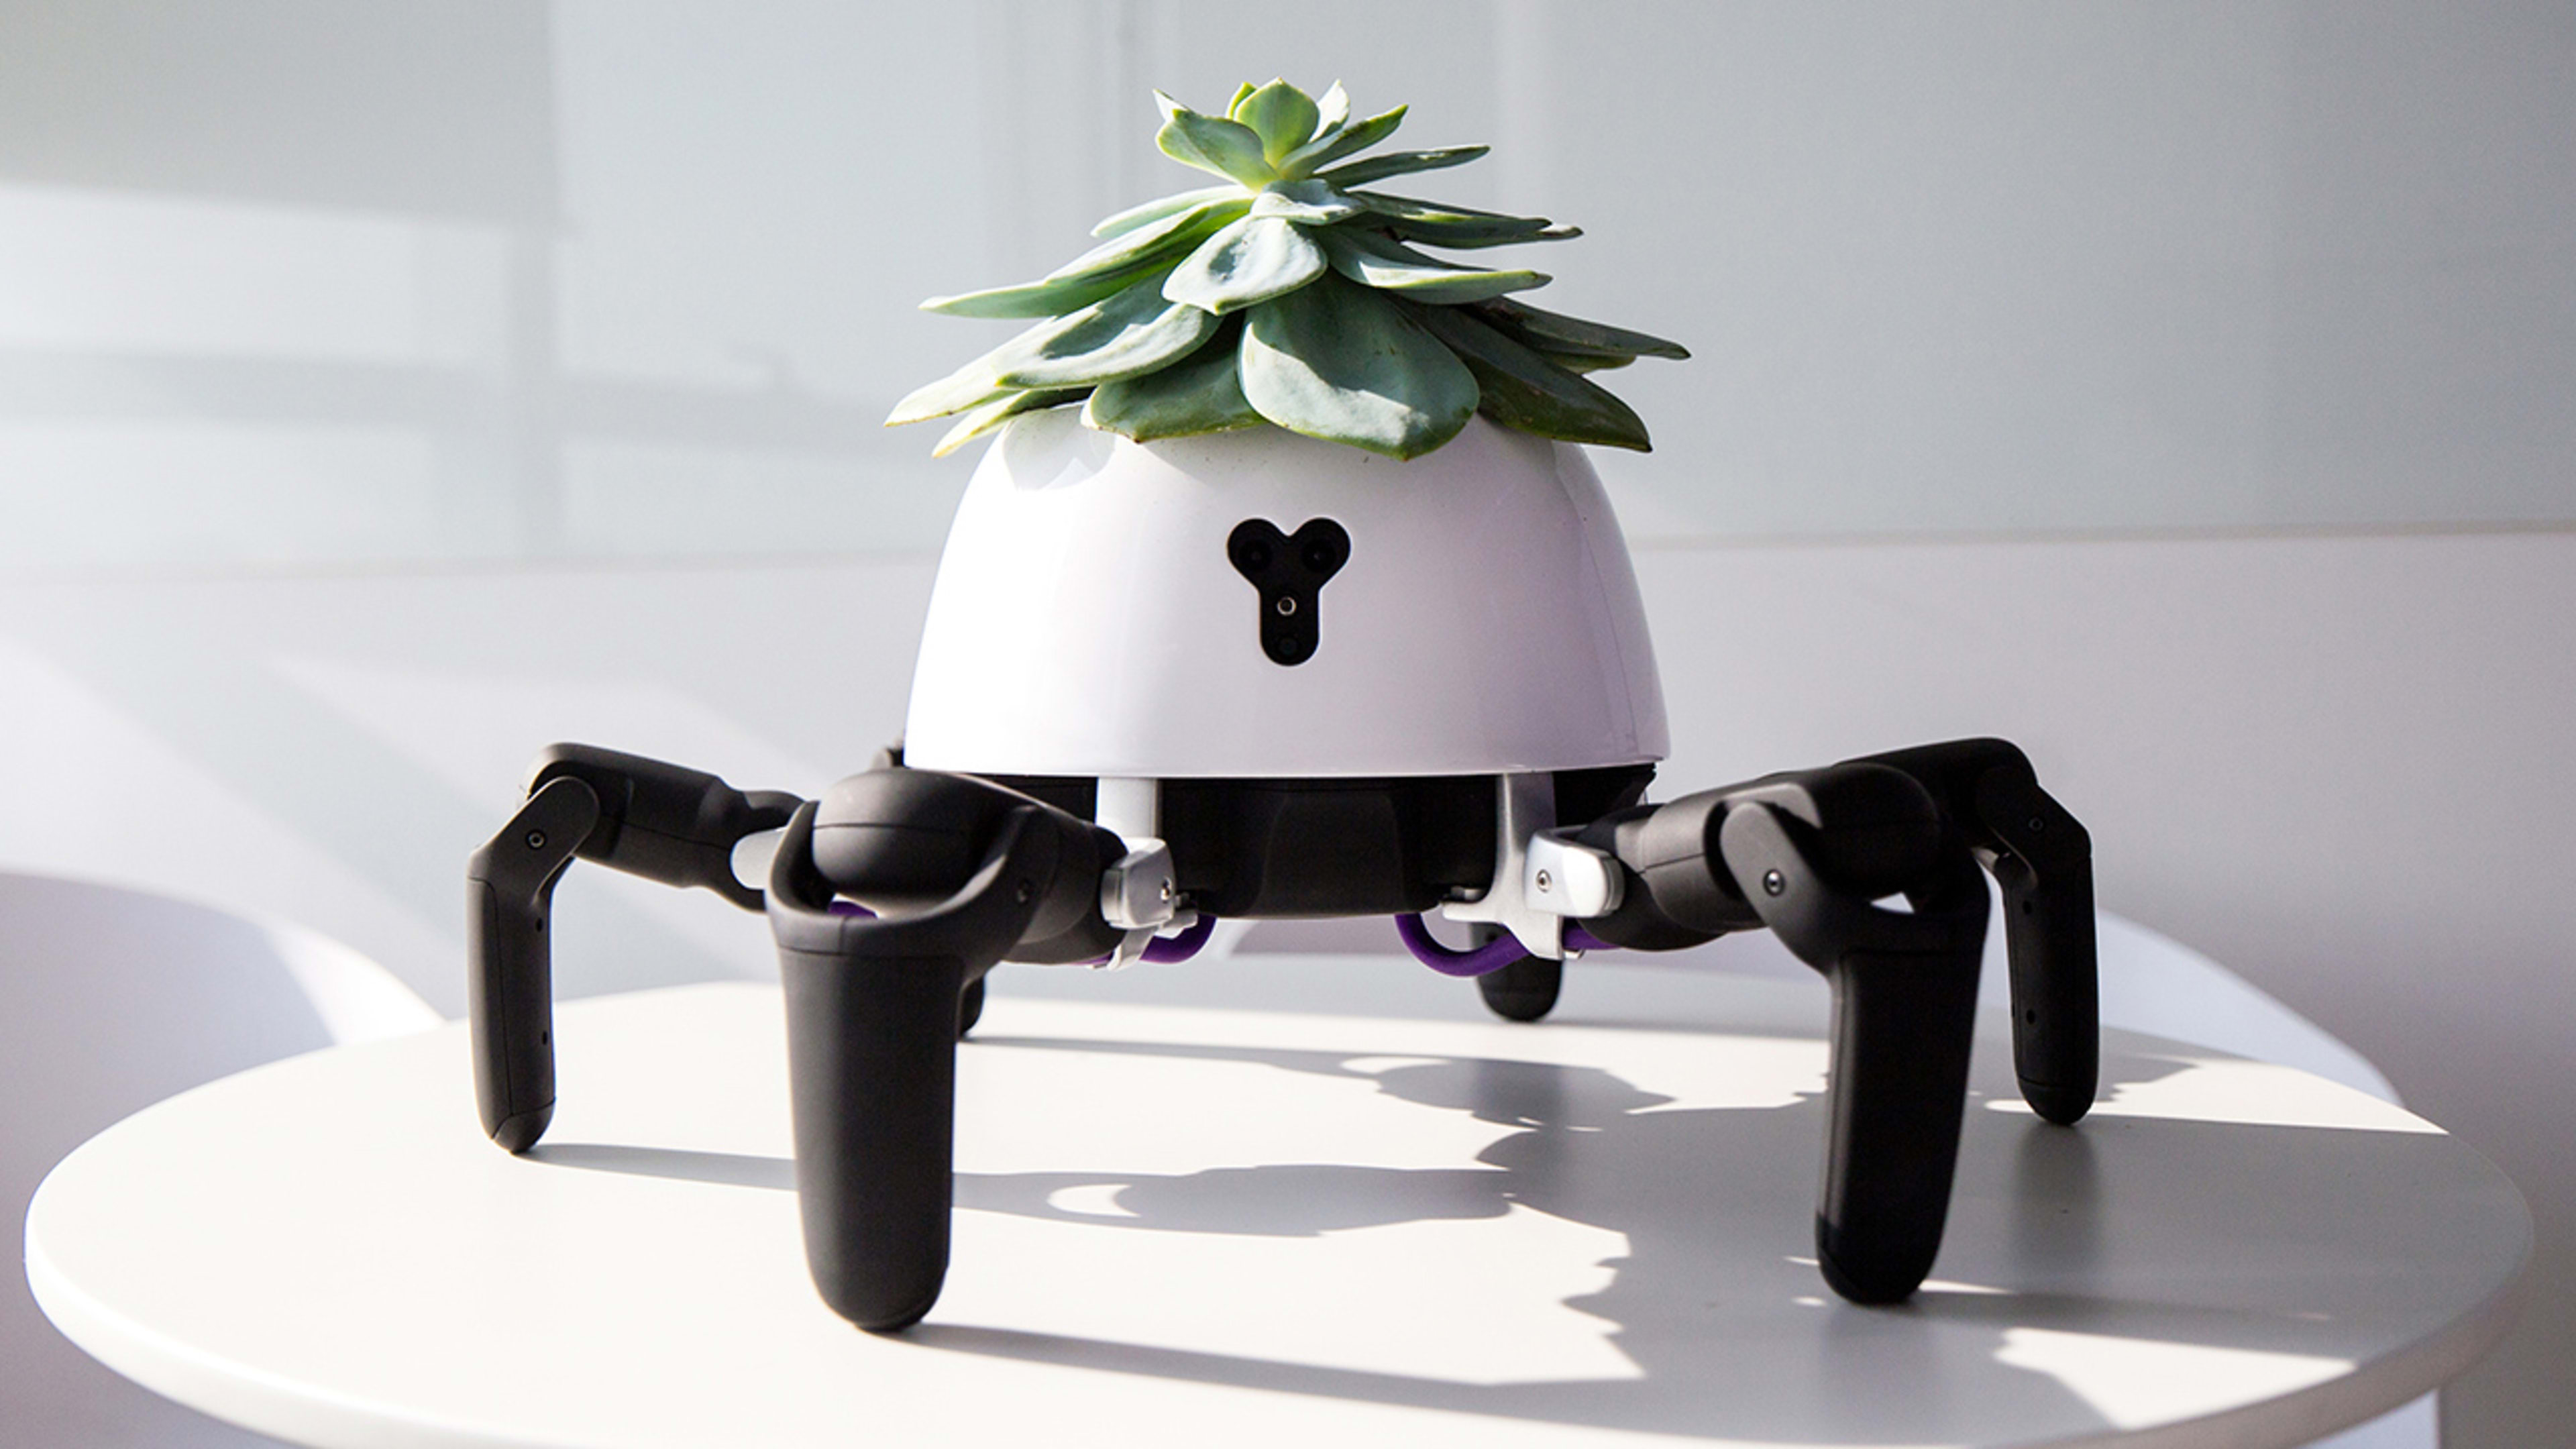 This sun-chasing robo-plant is wildly impractical, and wonderful